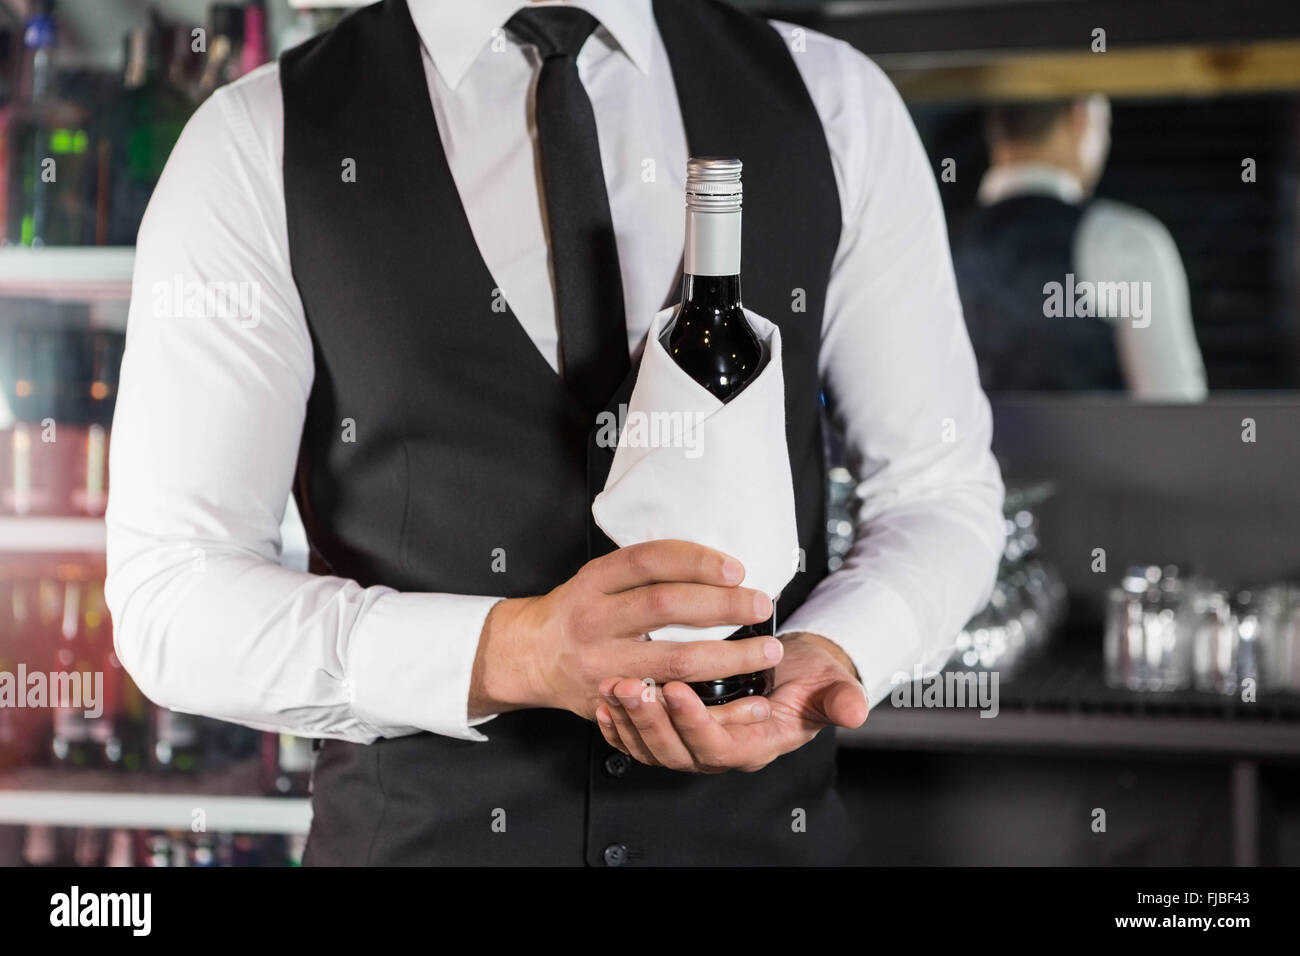 Mid section of bartender holding a wine bottle Stock Photo